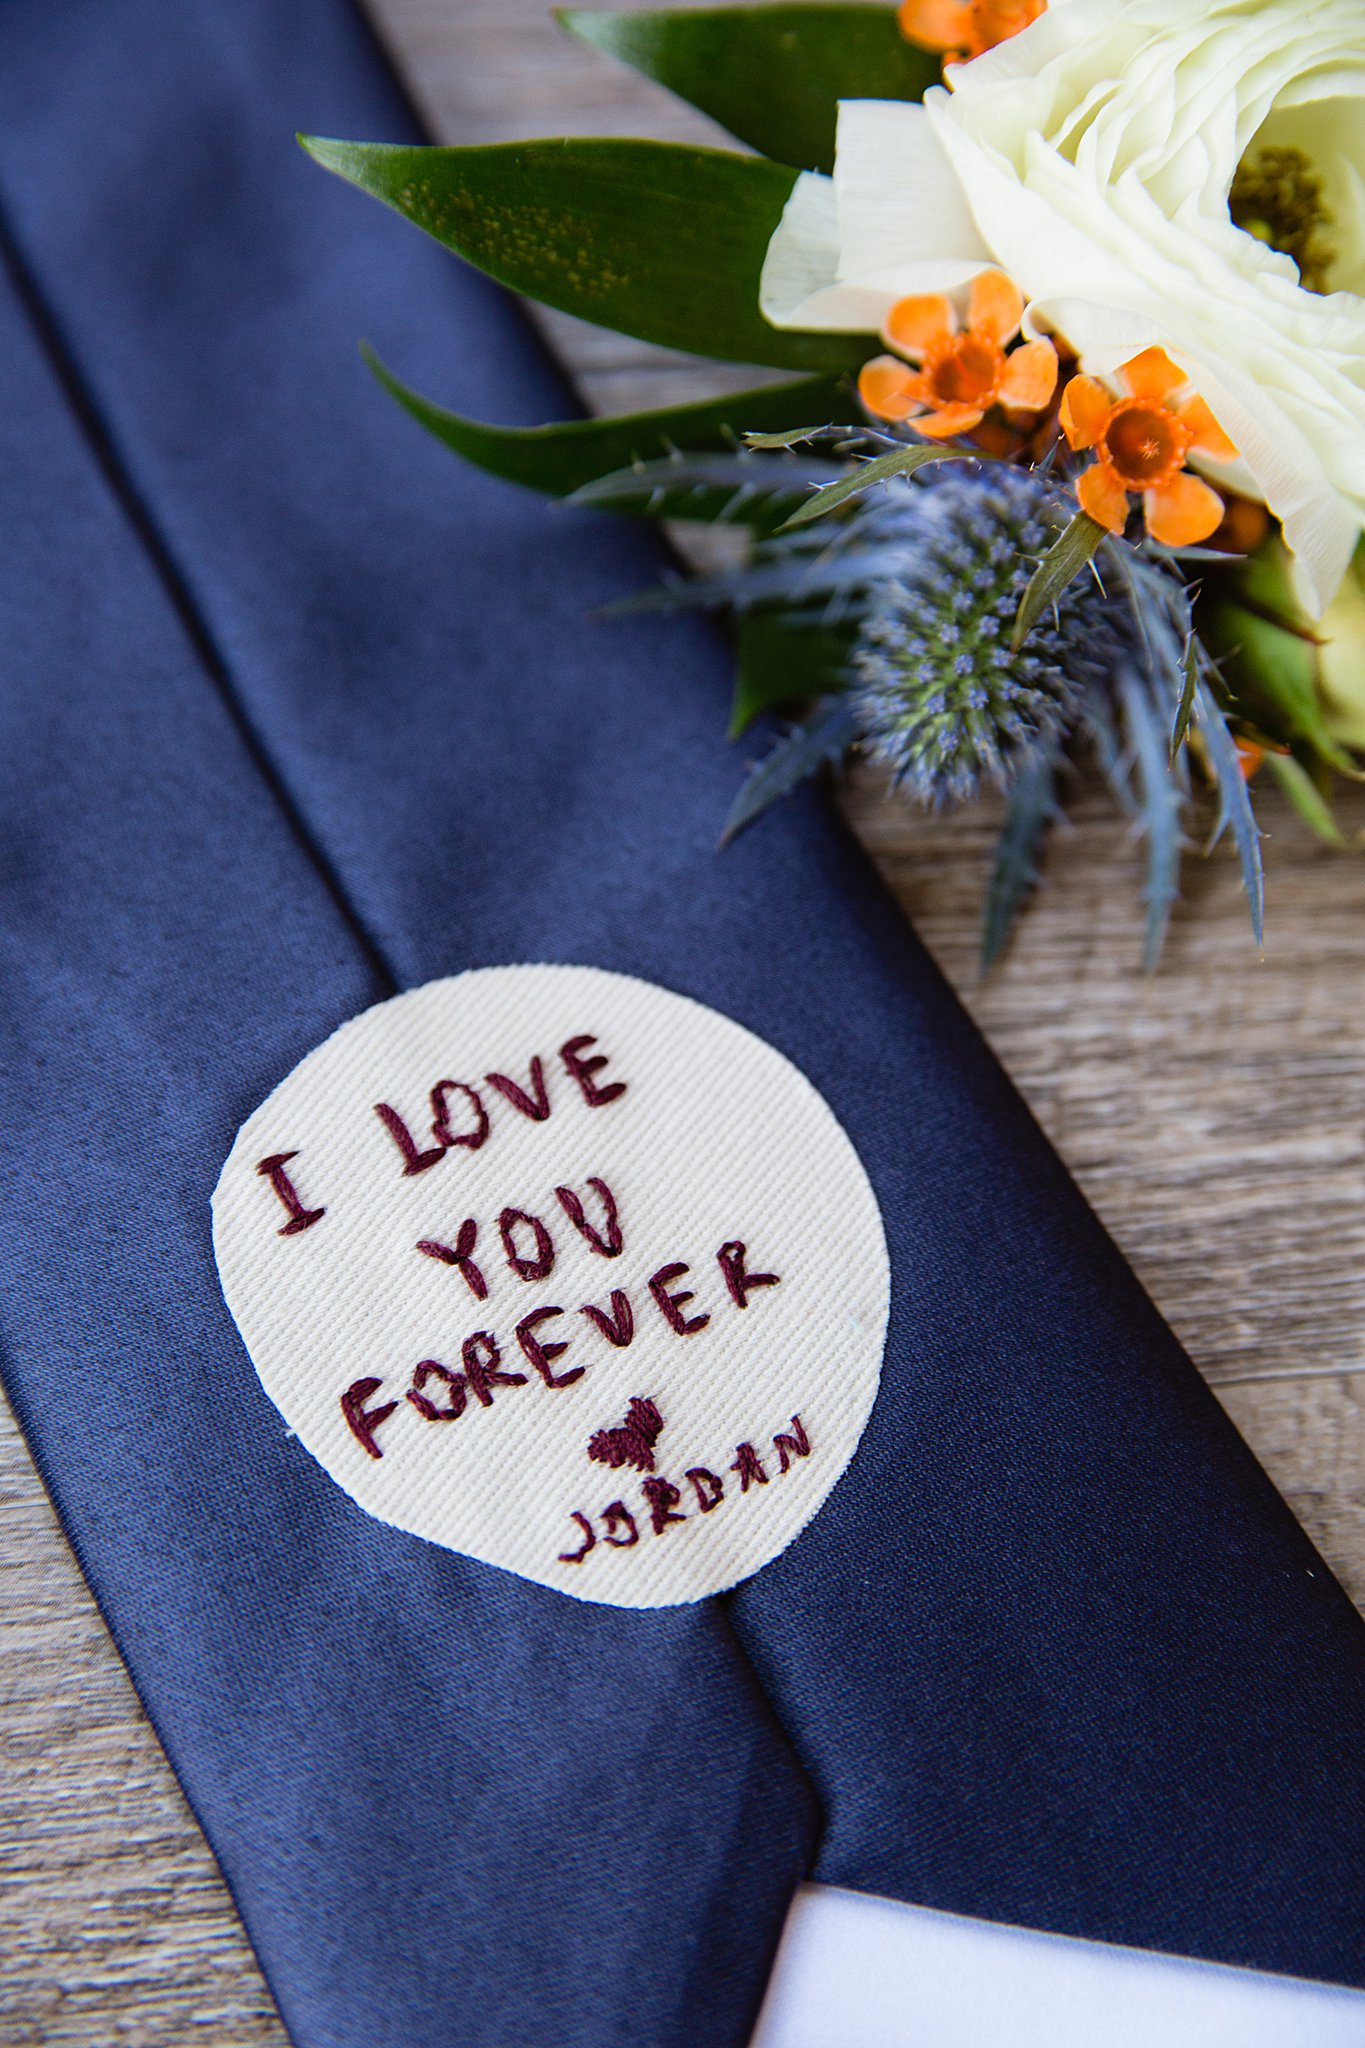 Custom message in groom's tie from the bride by Arizona wedding photographer PMA Photography.